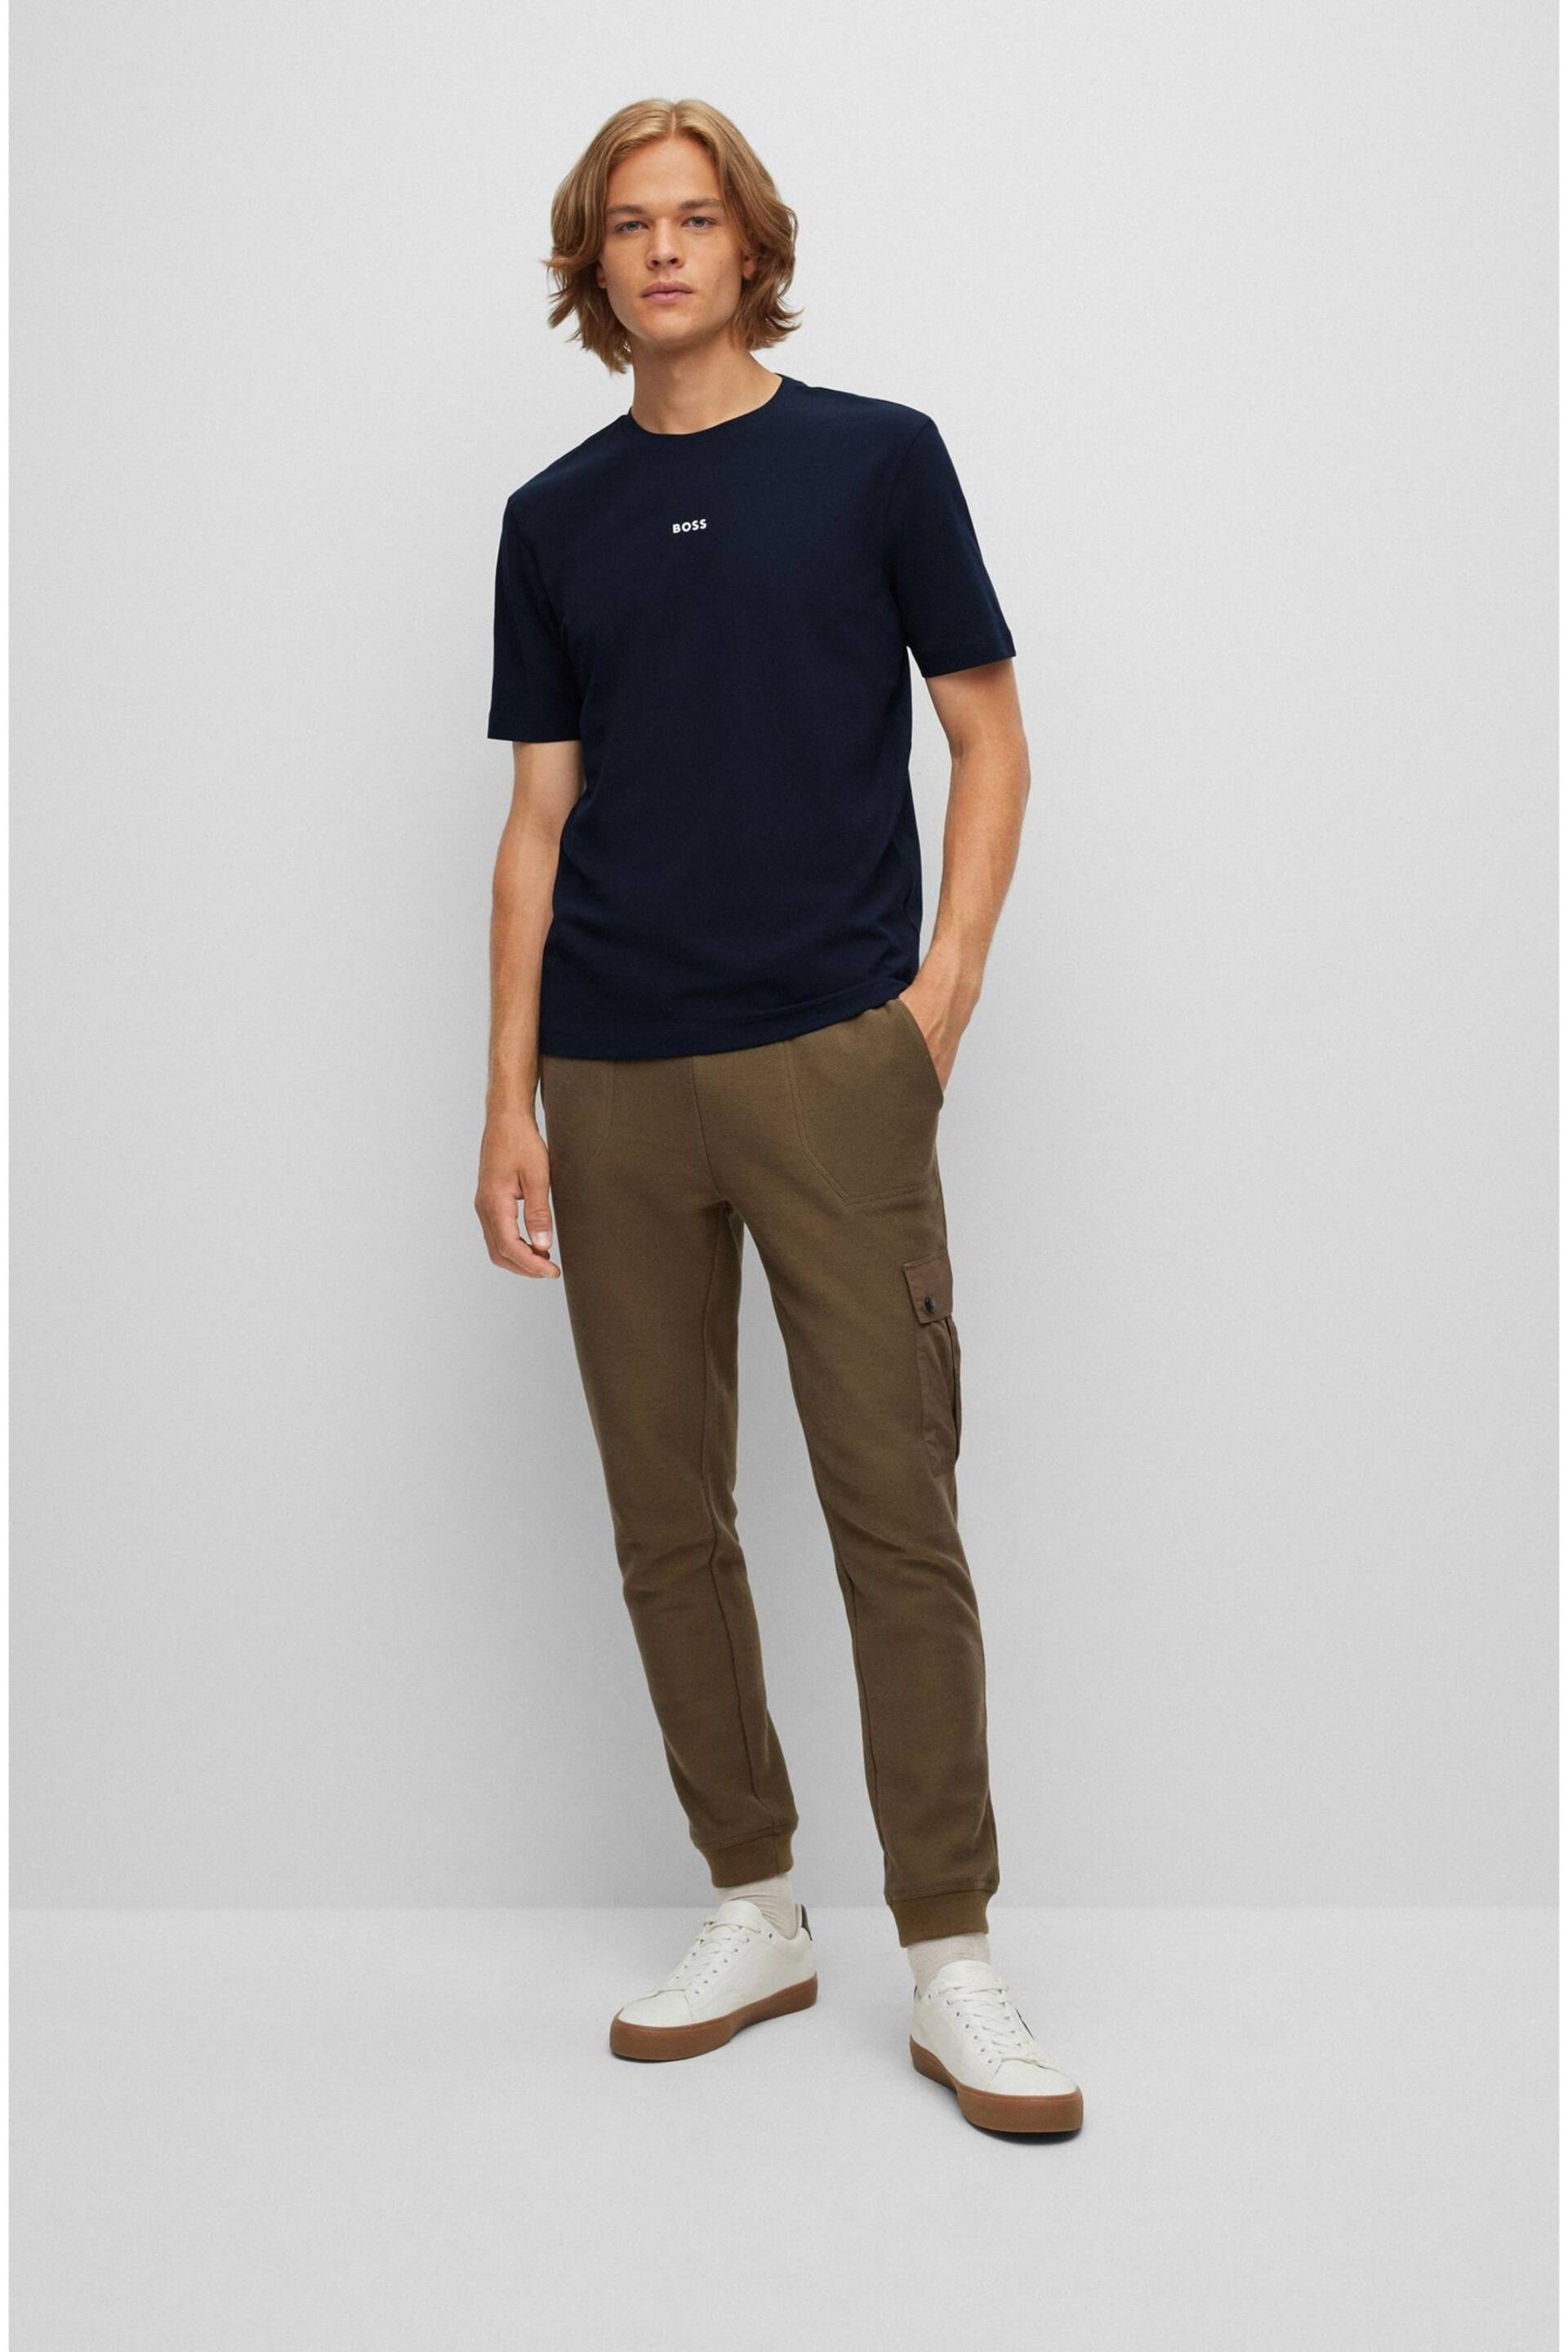 BOSS Dark Blue Relaxed Fit Central Logo T-Shirt - Image 3 of 4